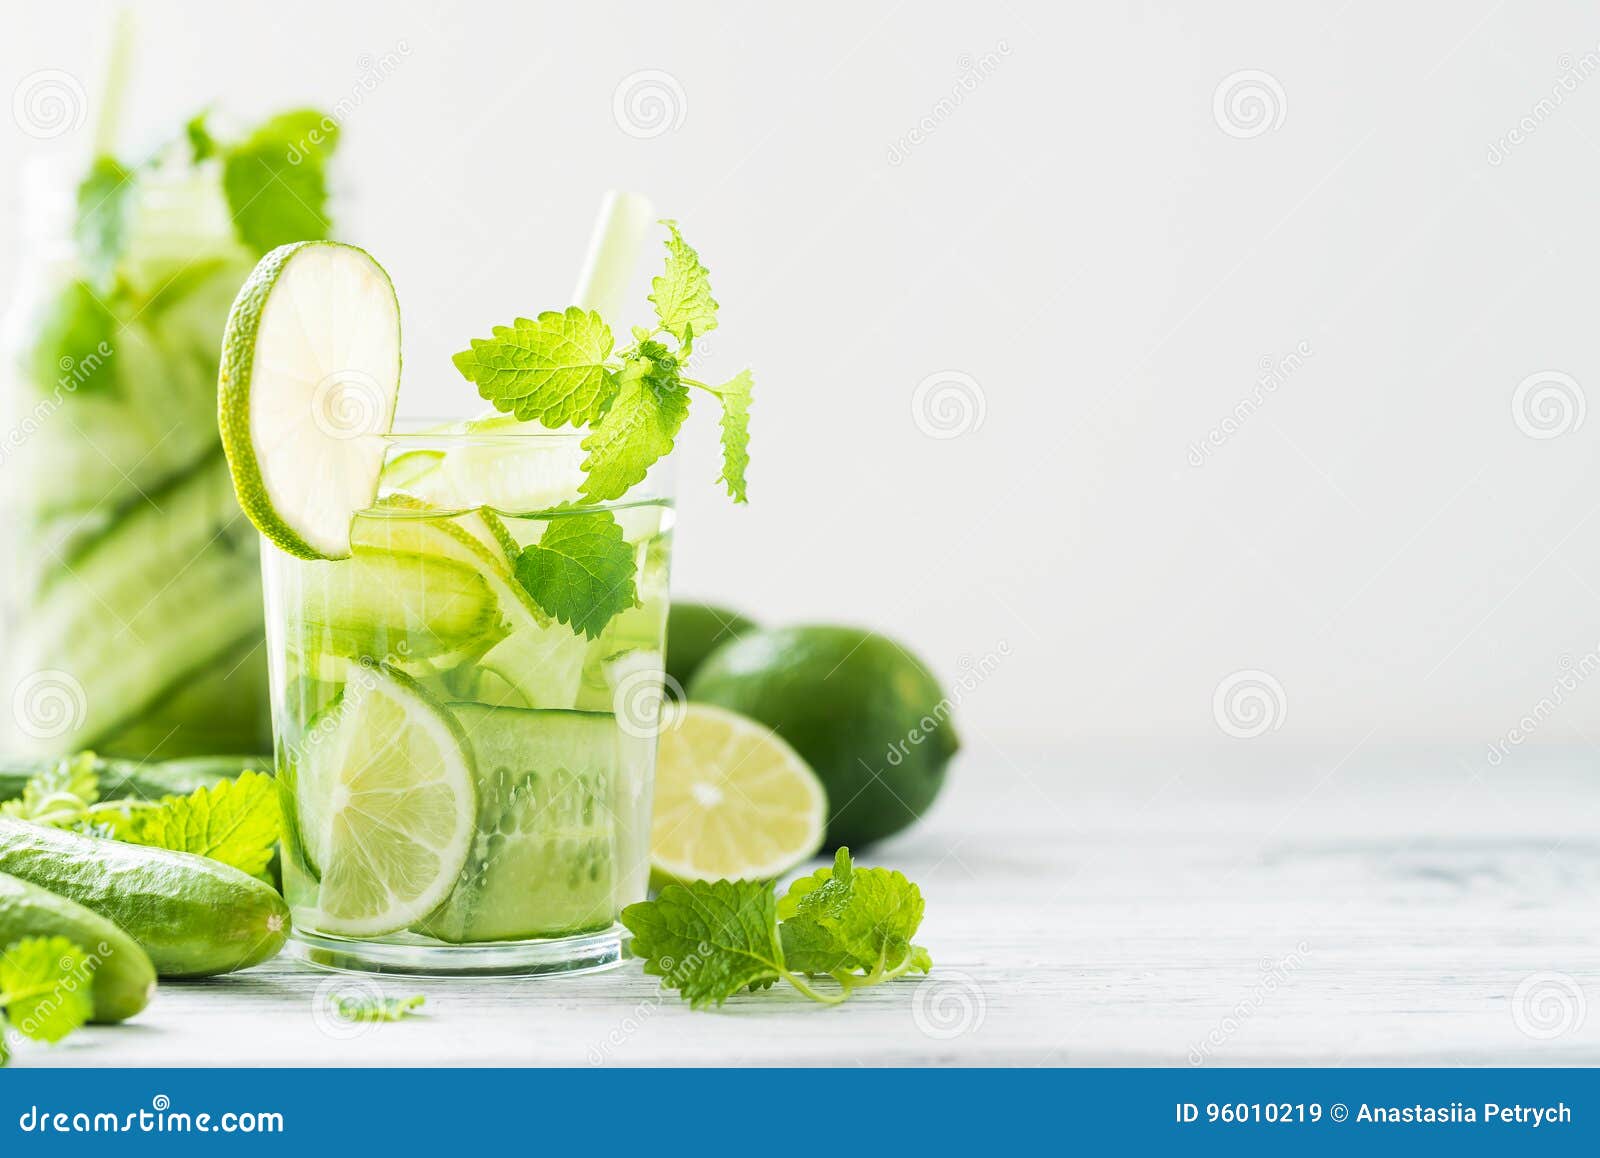 Refreshing Drink with Cucumber, Lime, Mint. Copy Space Stock Image